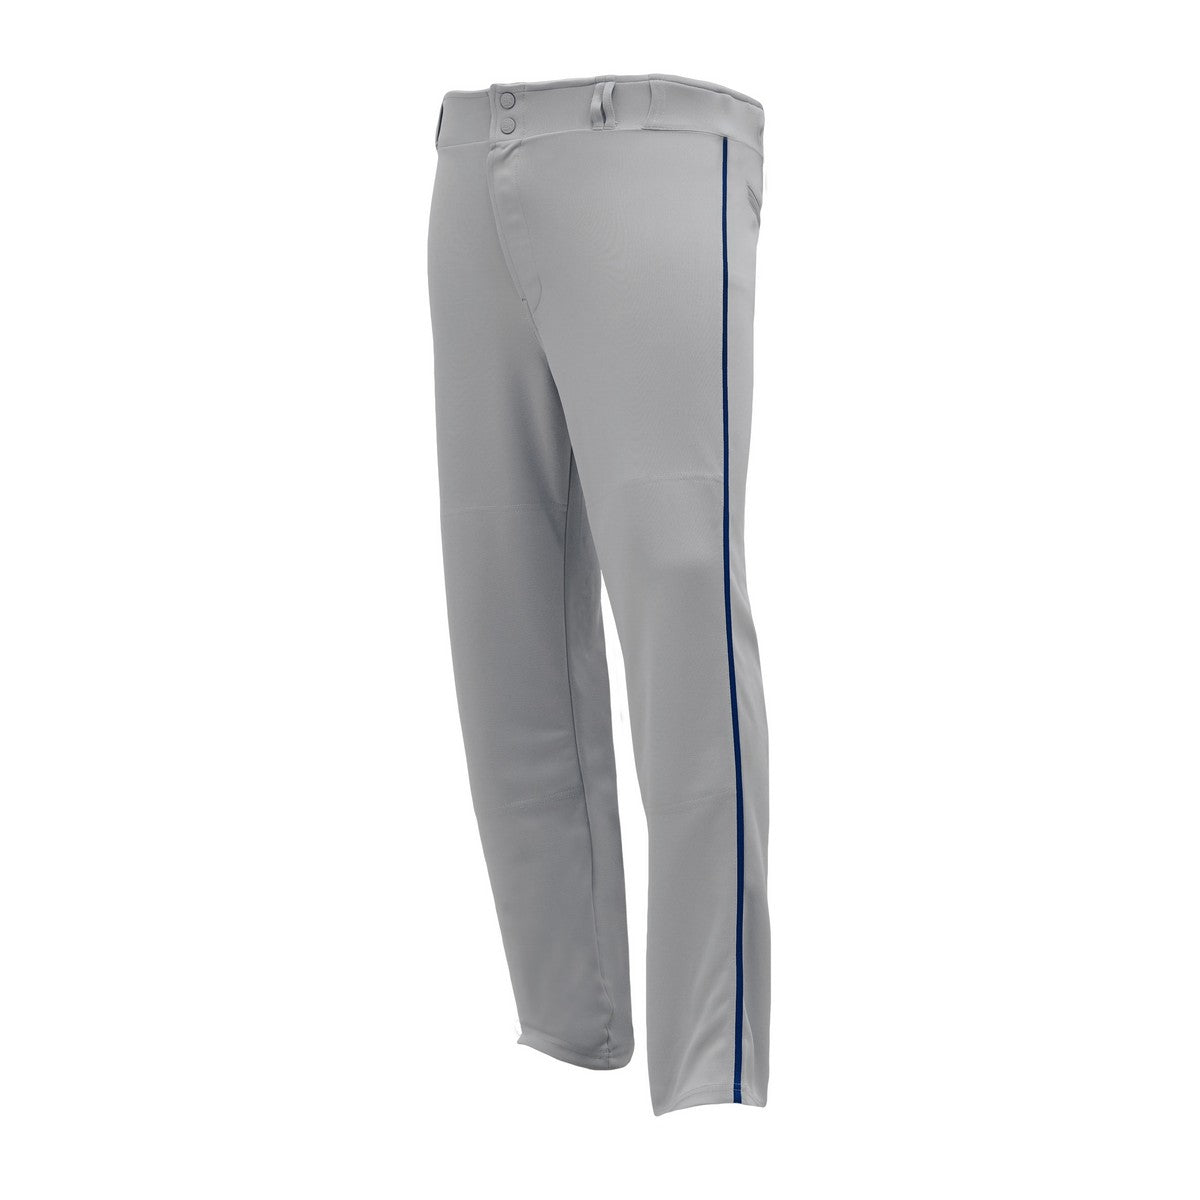 Prostar Grey and Navy Piped Pant